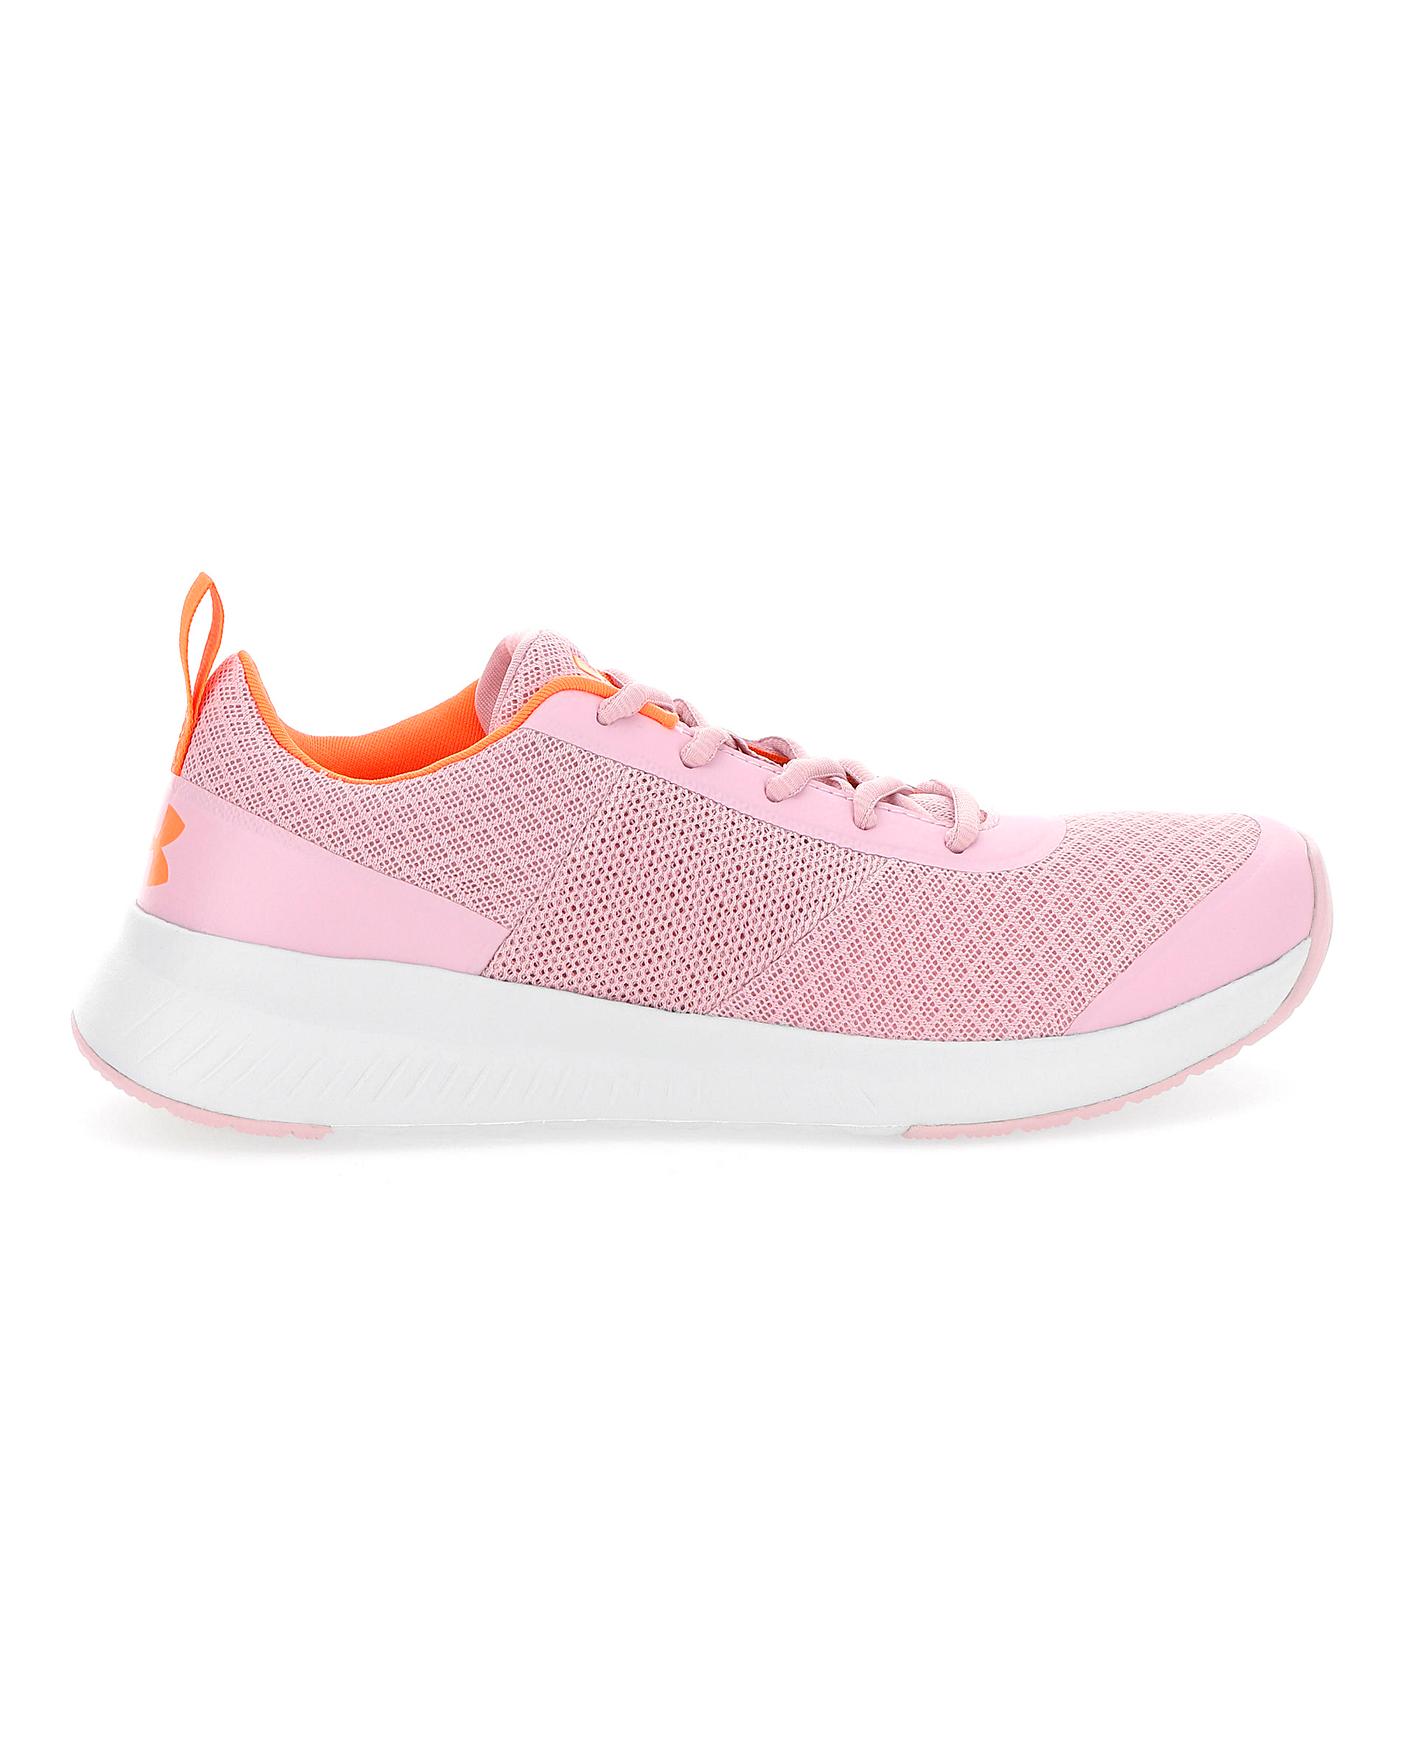 under armour aura trainer review